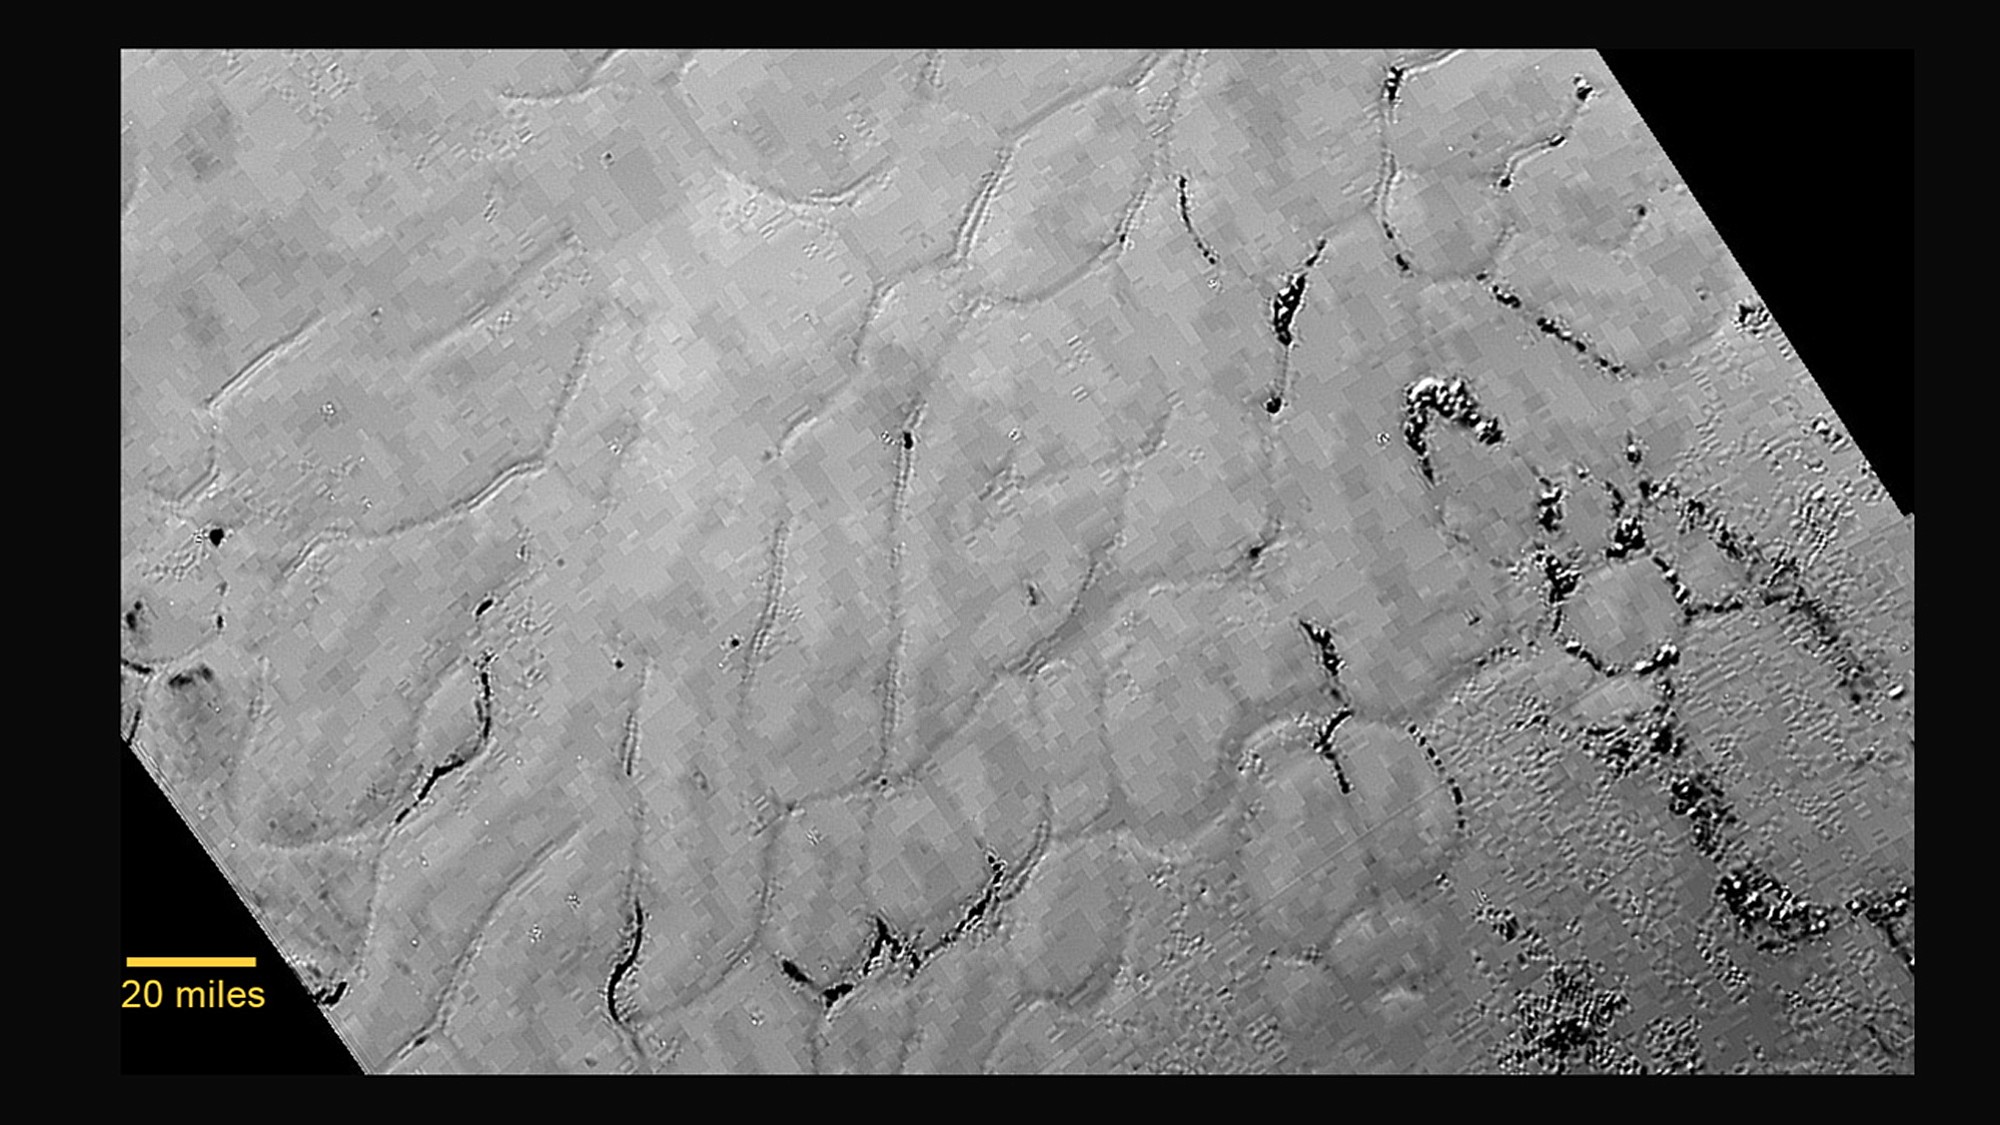 NASA
An image taken from NASA's New Horizons spacecraft shows a new close-up image from the heart-shaped feature on Pluto that reveals a vast, craterless plain.